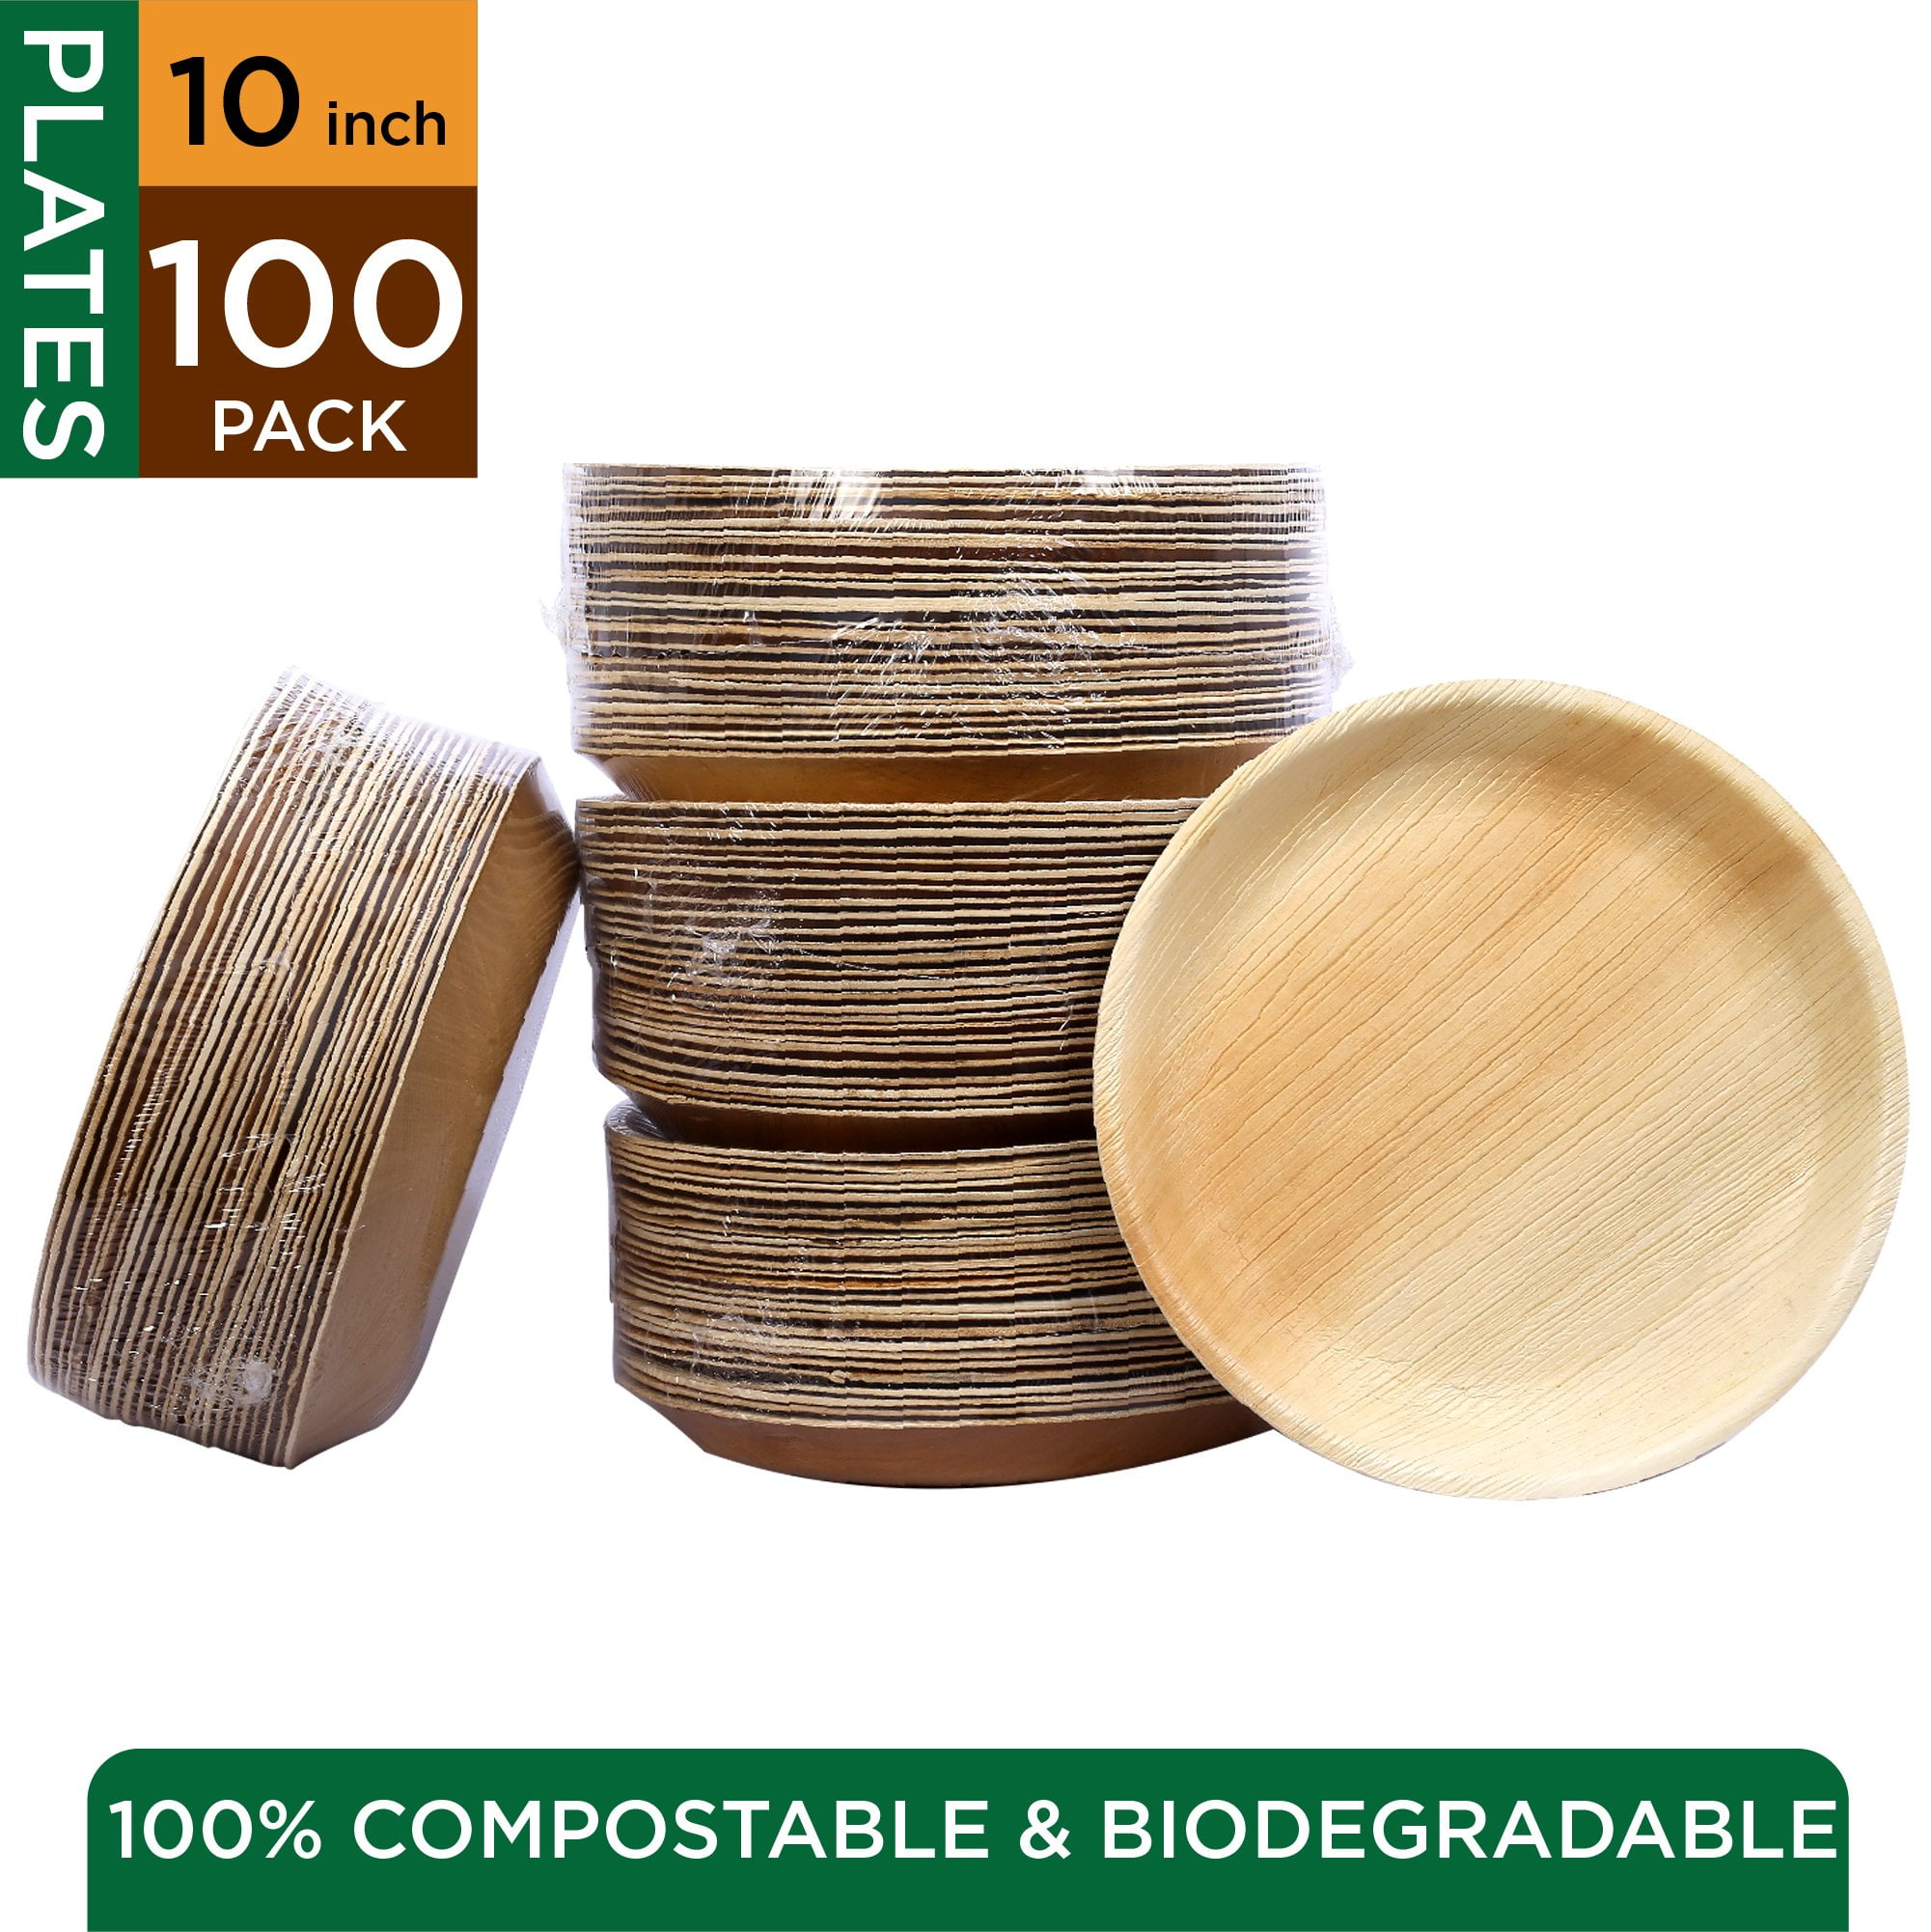 Naturally Chic Palm Leaf Plates Compostable and Biodegradable Plates for Weddings Parties and Events Bamboo Like Disposable 6 Inch Round Eco Friendly 